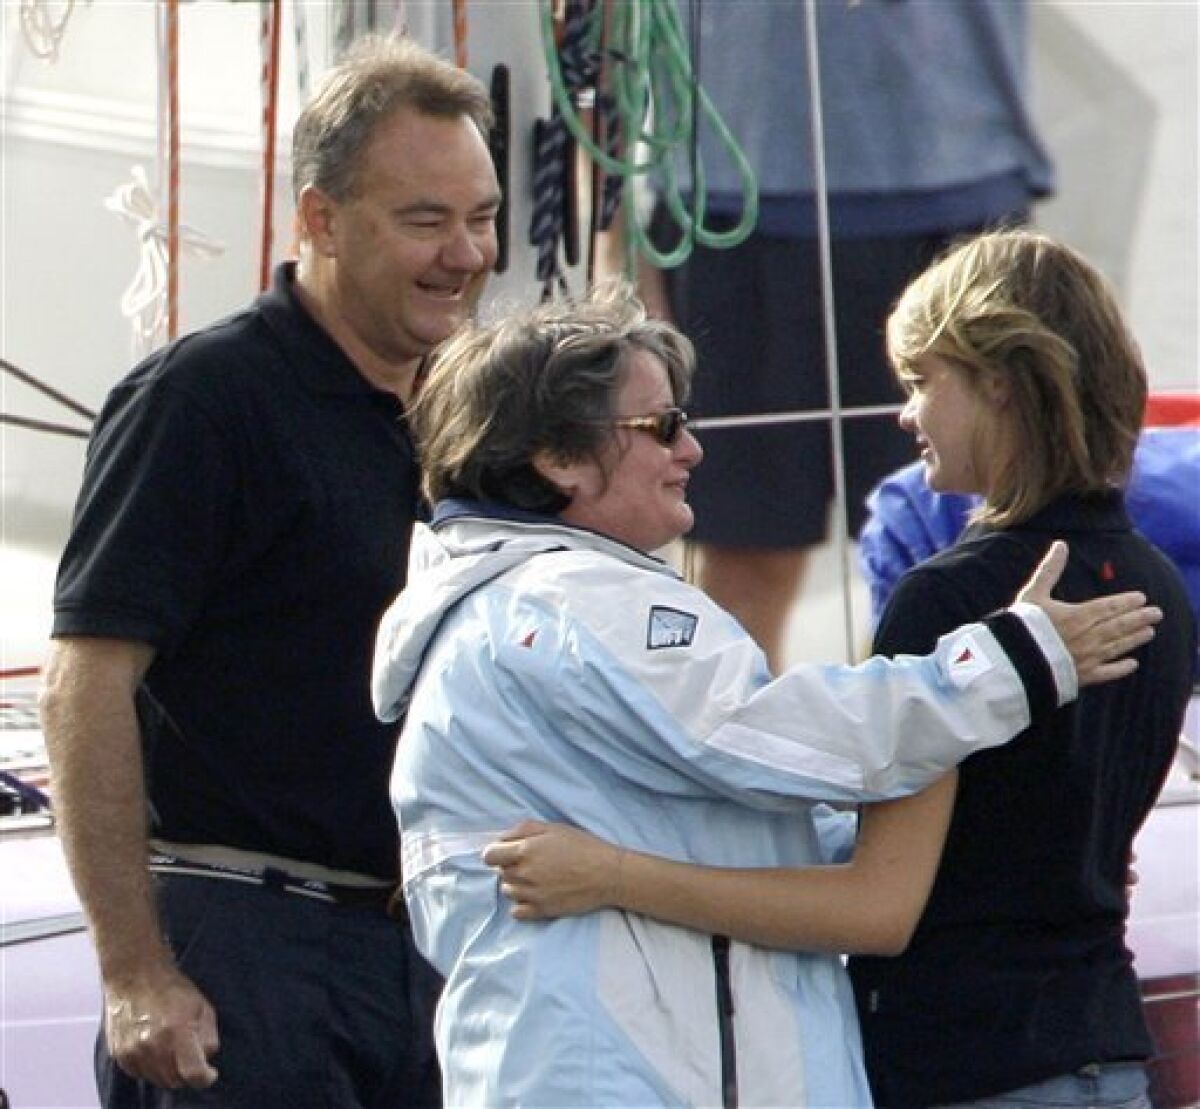 In this file photo from Oct. 18, 2009, teenage sailor Jessica Watson, right, hugs her mother Julie as her father, Roger, looks on as she prepares to depart Sydney on her boat Ella's Pink Lady in an attempt to become the youngest person to sail non-stop, solo and unassisted, around the world. Thousands are expected to line Sydney Harbour on Saturday, May 15, 2010, to offer a hero's welcome to 16-year-old Jessica Watson, who has battled 40-foot (12-meter) waves, multiple knockdowns and critics who called her too immature and inexperienced for the treacherous journey. (AP Photo/Rick Rycroft, File)